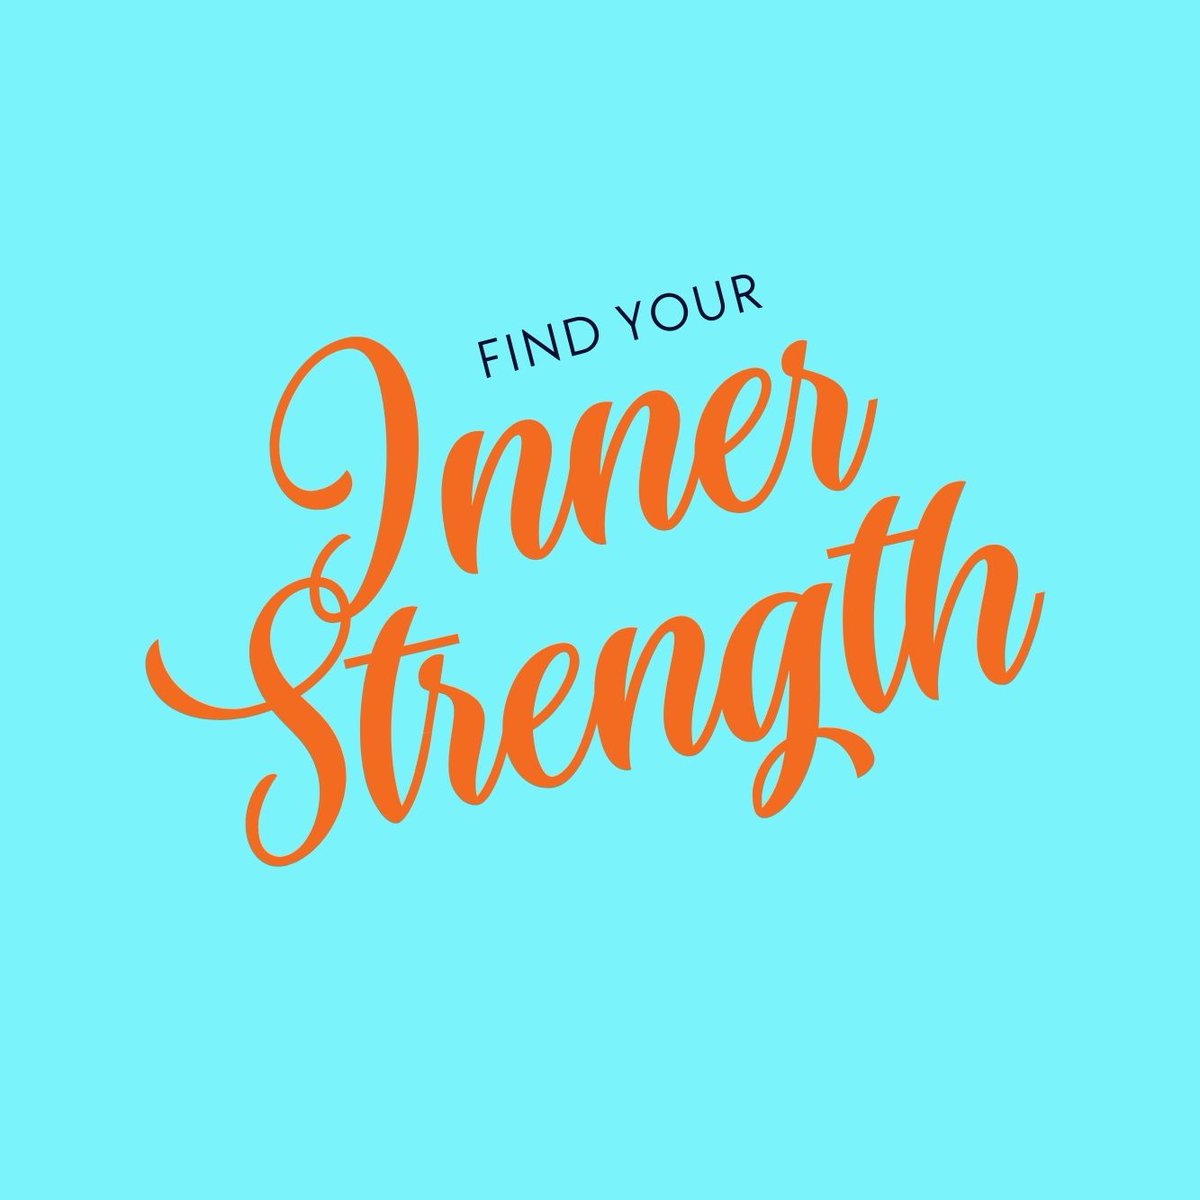 With resilience as your armor, embrace every obstacle as an opportunity to grow, transform, and thrive. #FindYourStrength #InnerPower #ResilienceUnleashed#FindYourStrength #InnerStrength #OvercomeObstacles